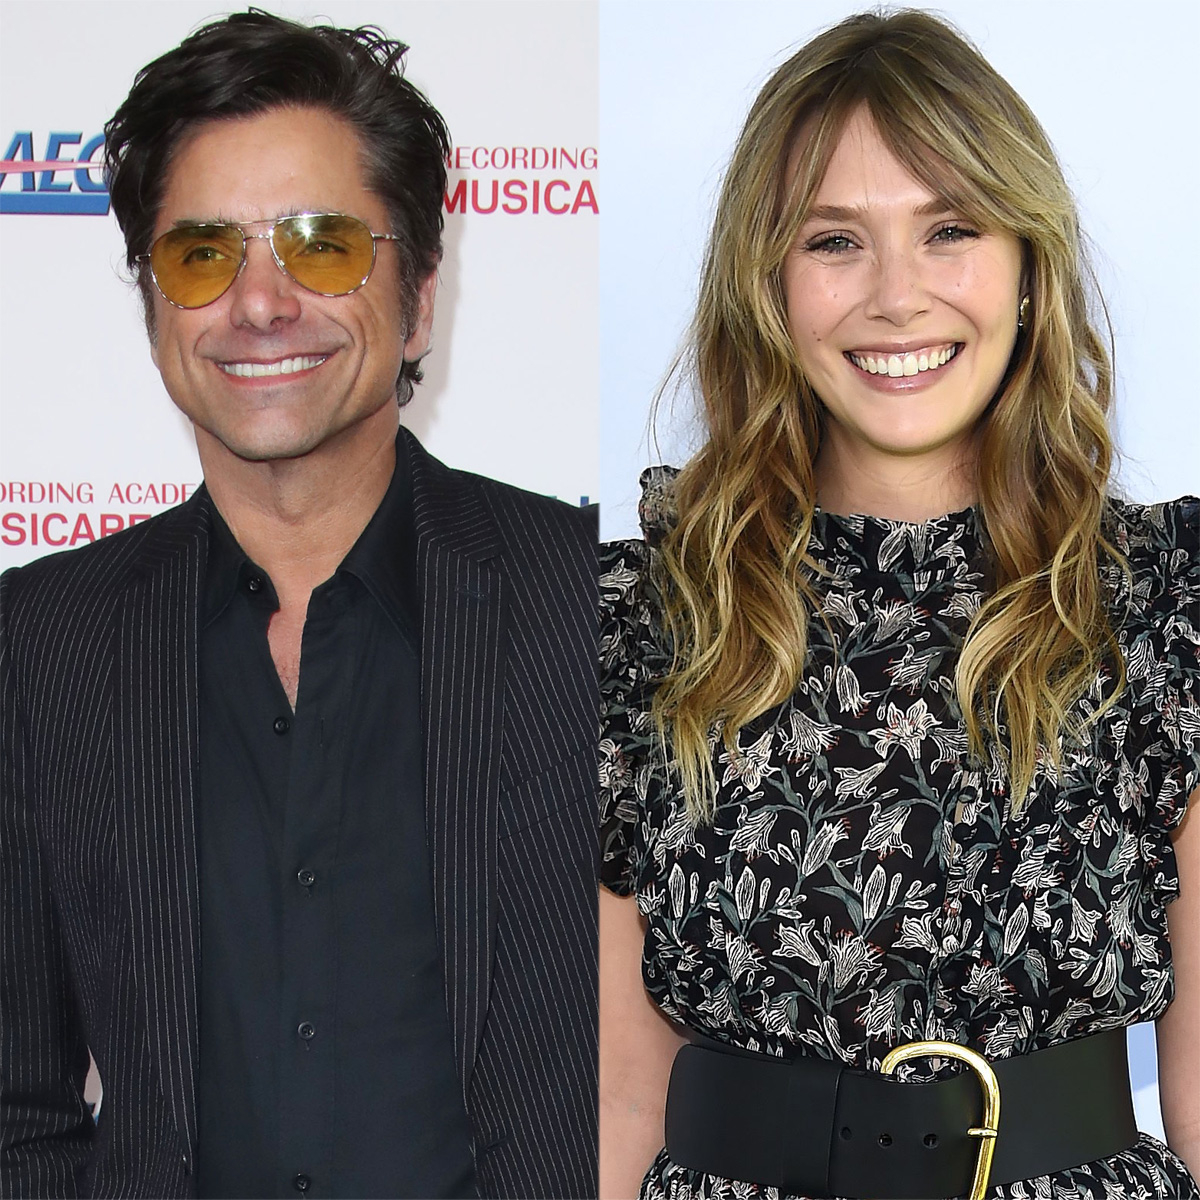 John Stamos shares an invisible photo of Full House with Elizabeth Olsen